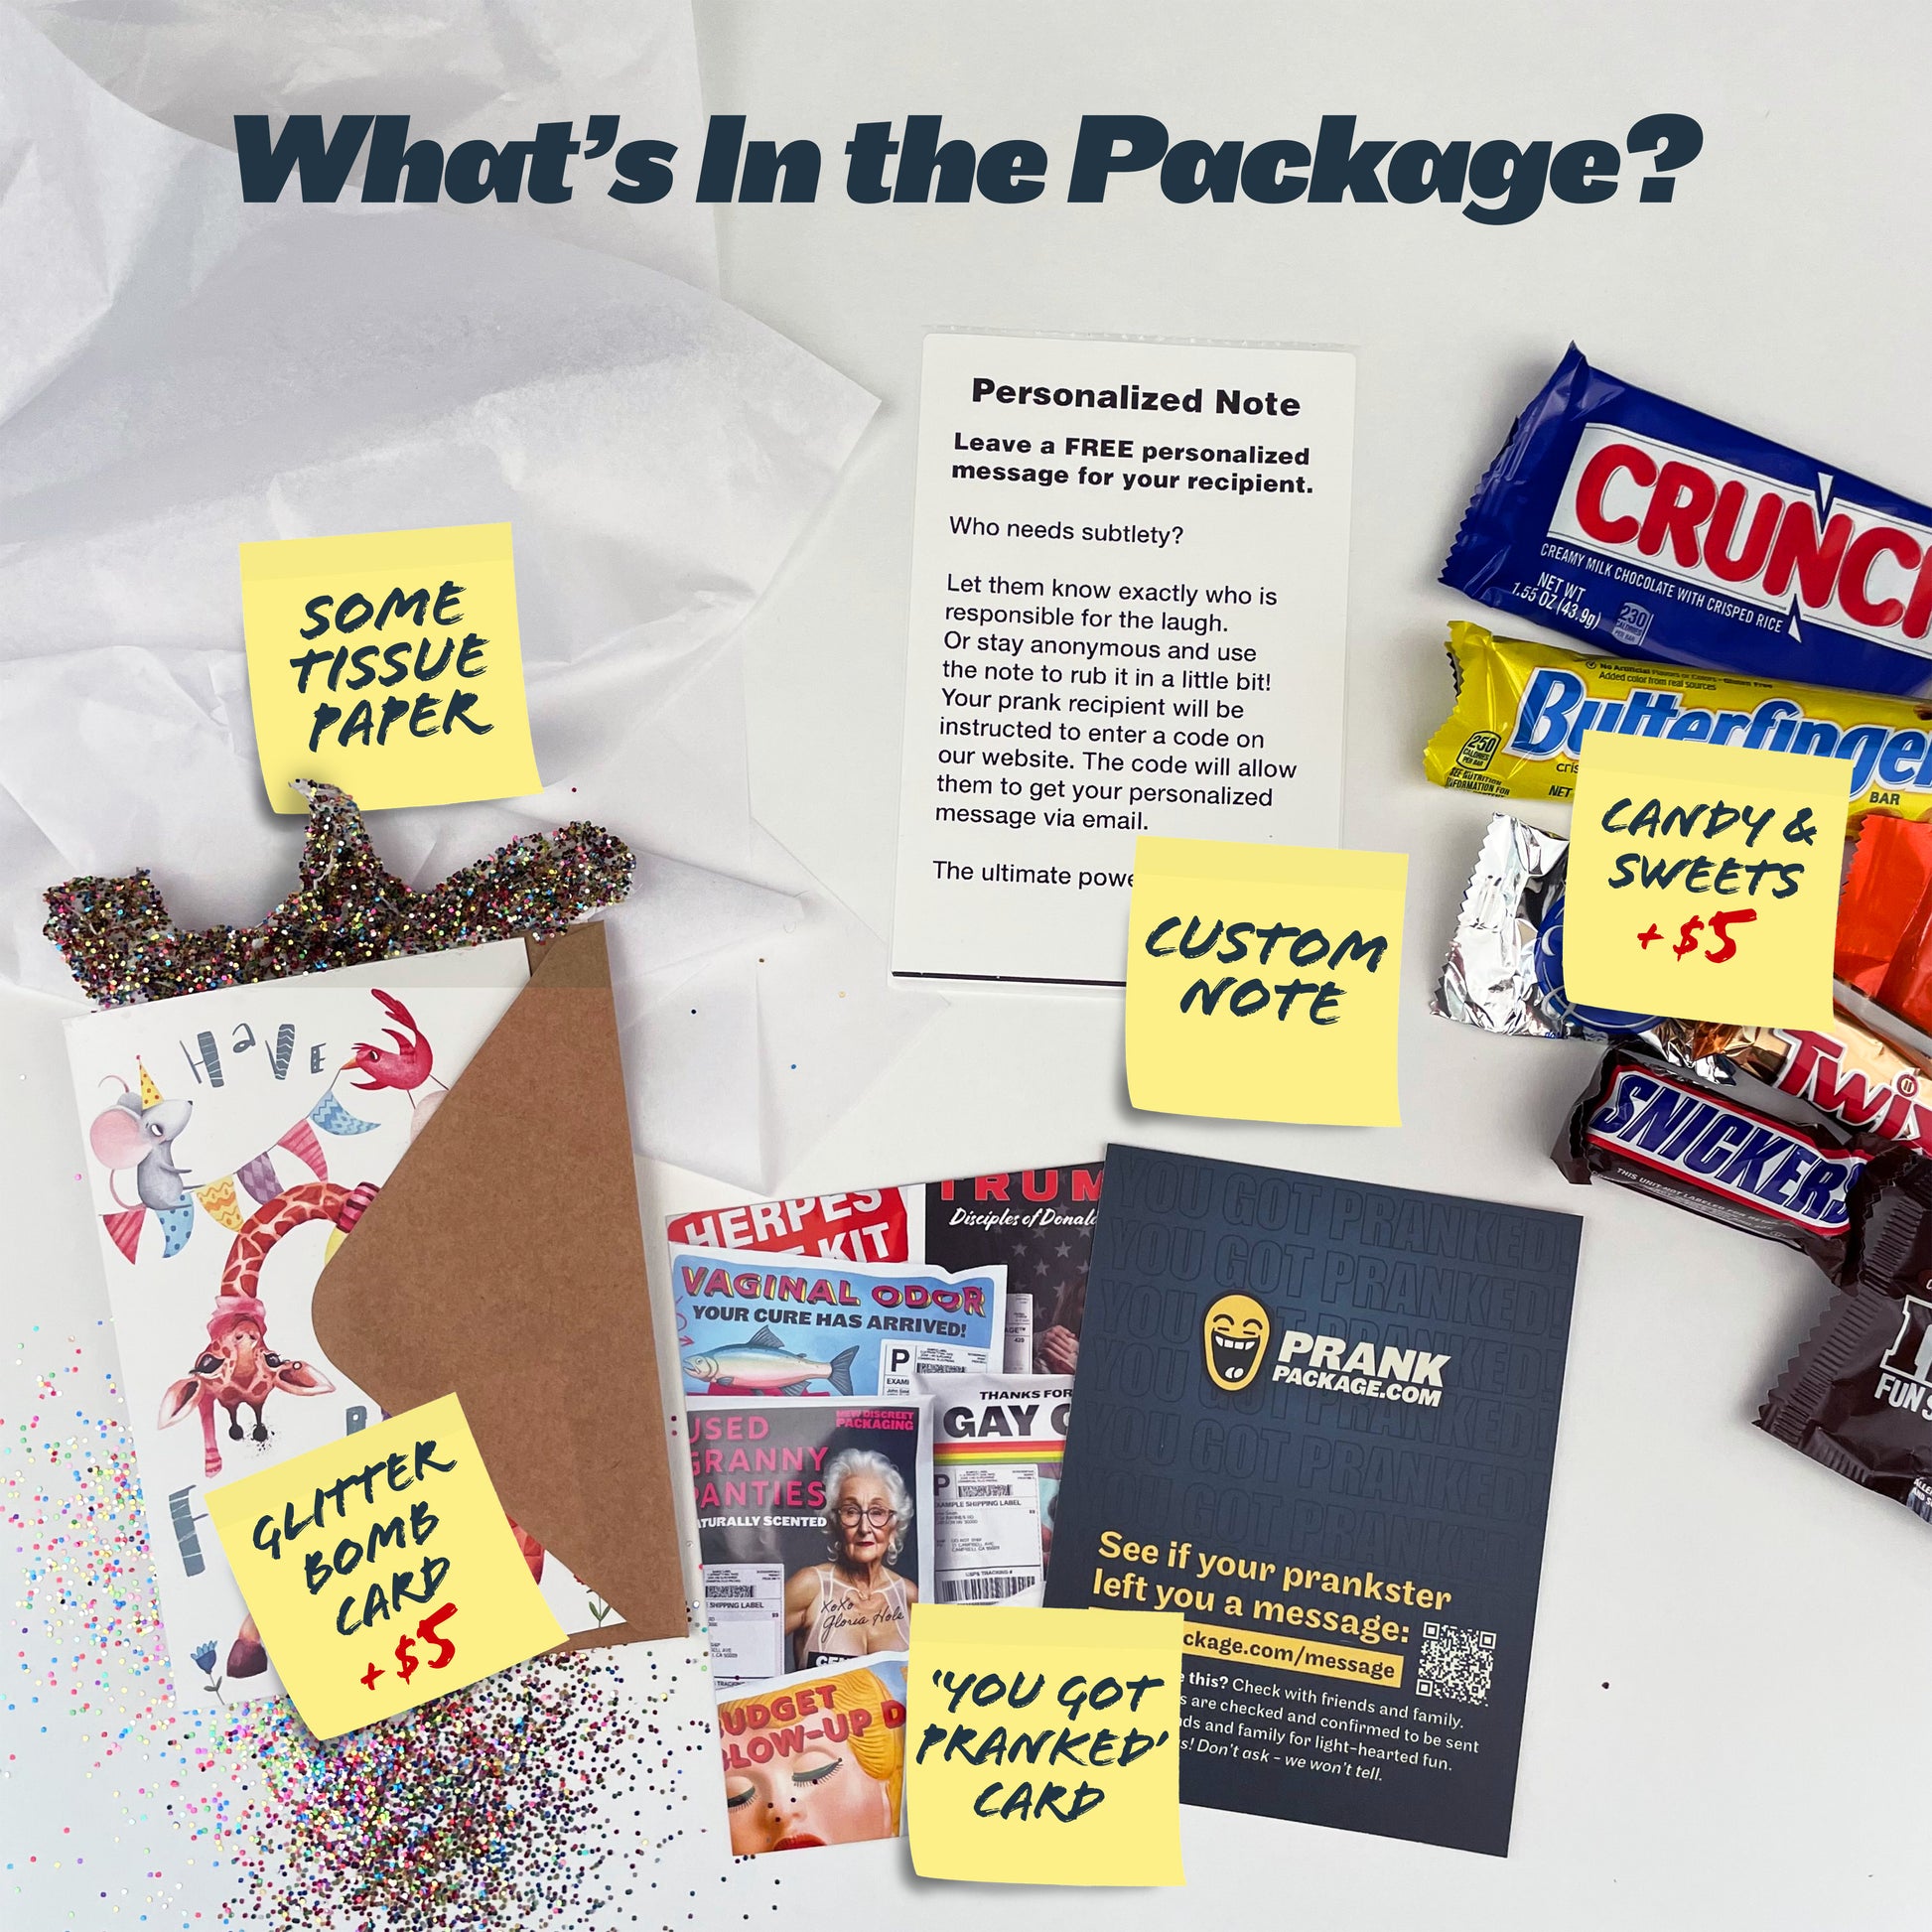 Items included in the Trump Prank Package shown on a white background: tissue paper, an optional glitter bomb greeting card, a personalized note, optional candy, and a 'You Got Pranked!' card.